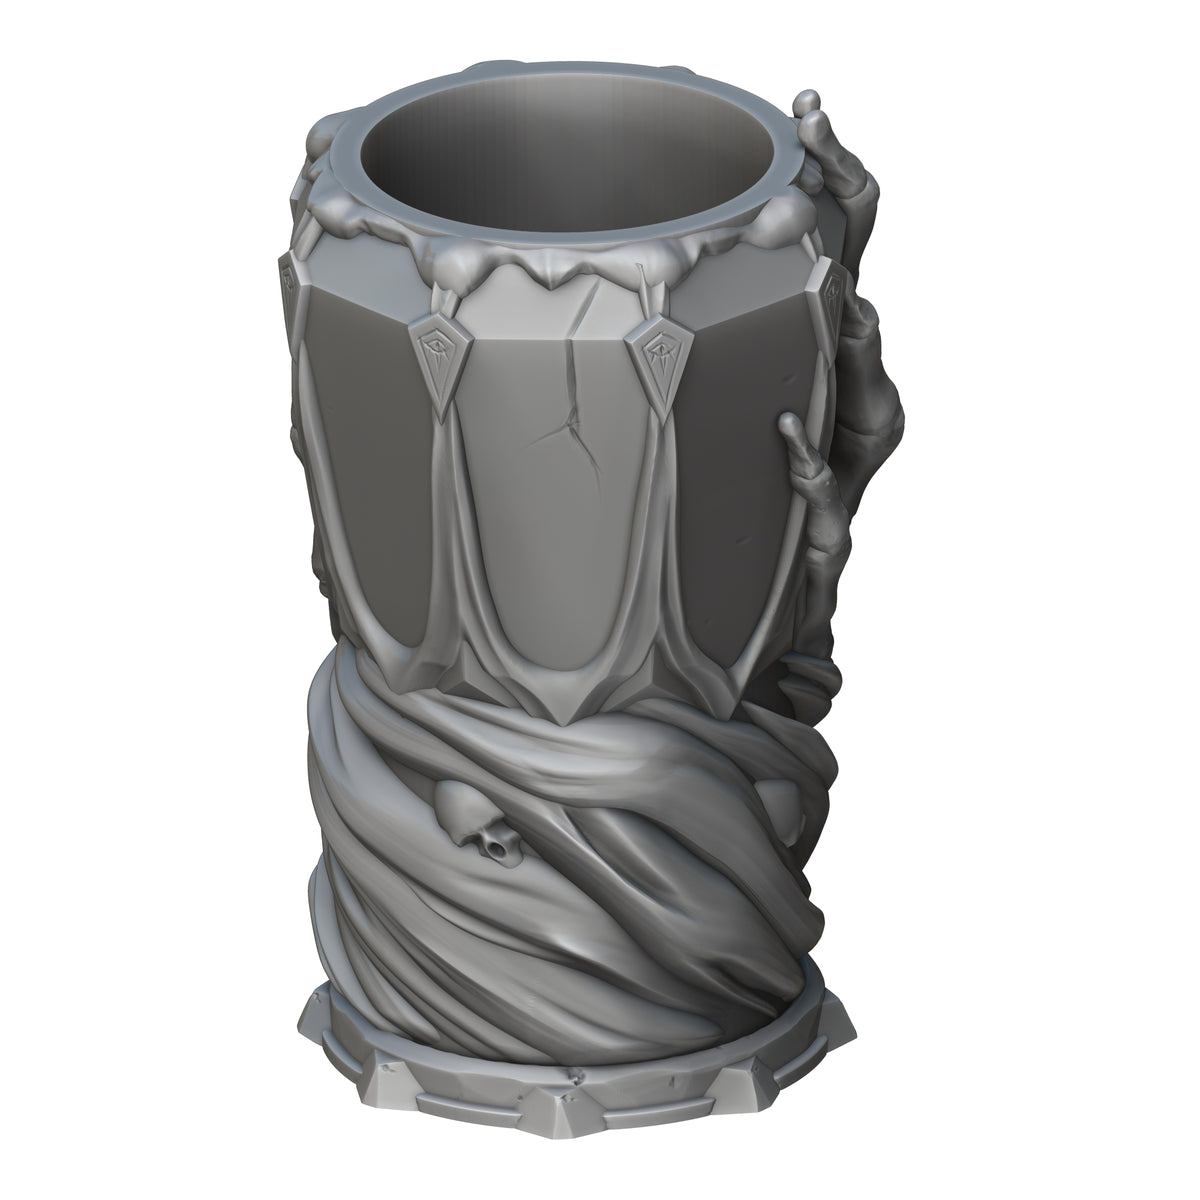 The Lich Themed Mythic Mug with FREE Insert/Riser